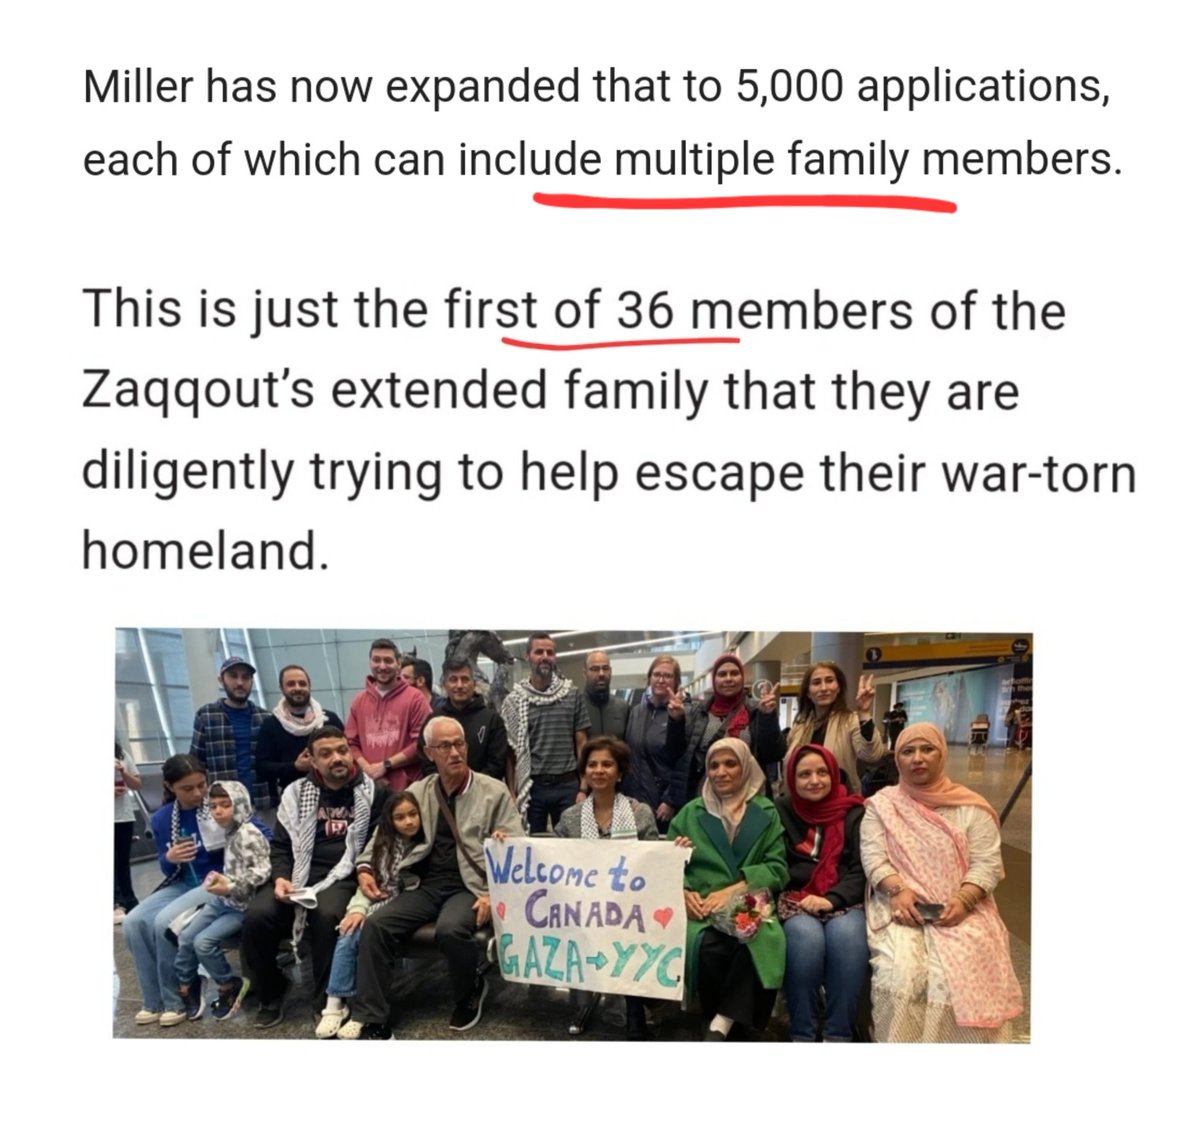 Minister of Mass Immigration Marc Miller has confirmed that the expanded visa program for Gazans isn't for 5,000 people but for 5,000 applications. Each applications can hold multiple family members. Just one family in Calgary brought 36 of their family members from Gaza. The